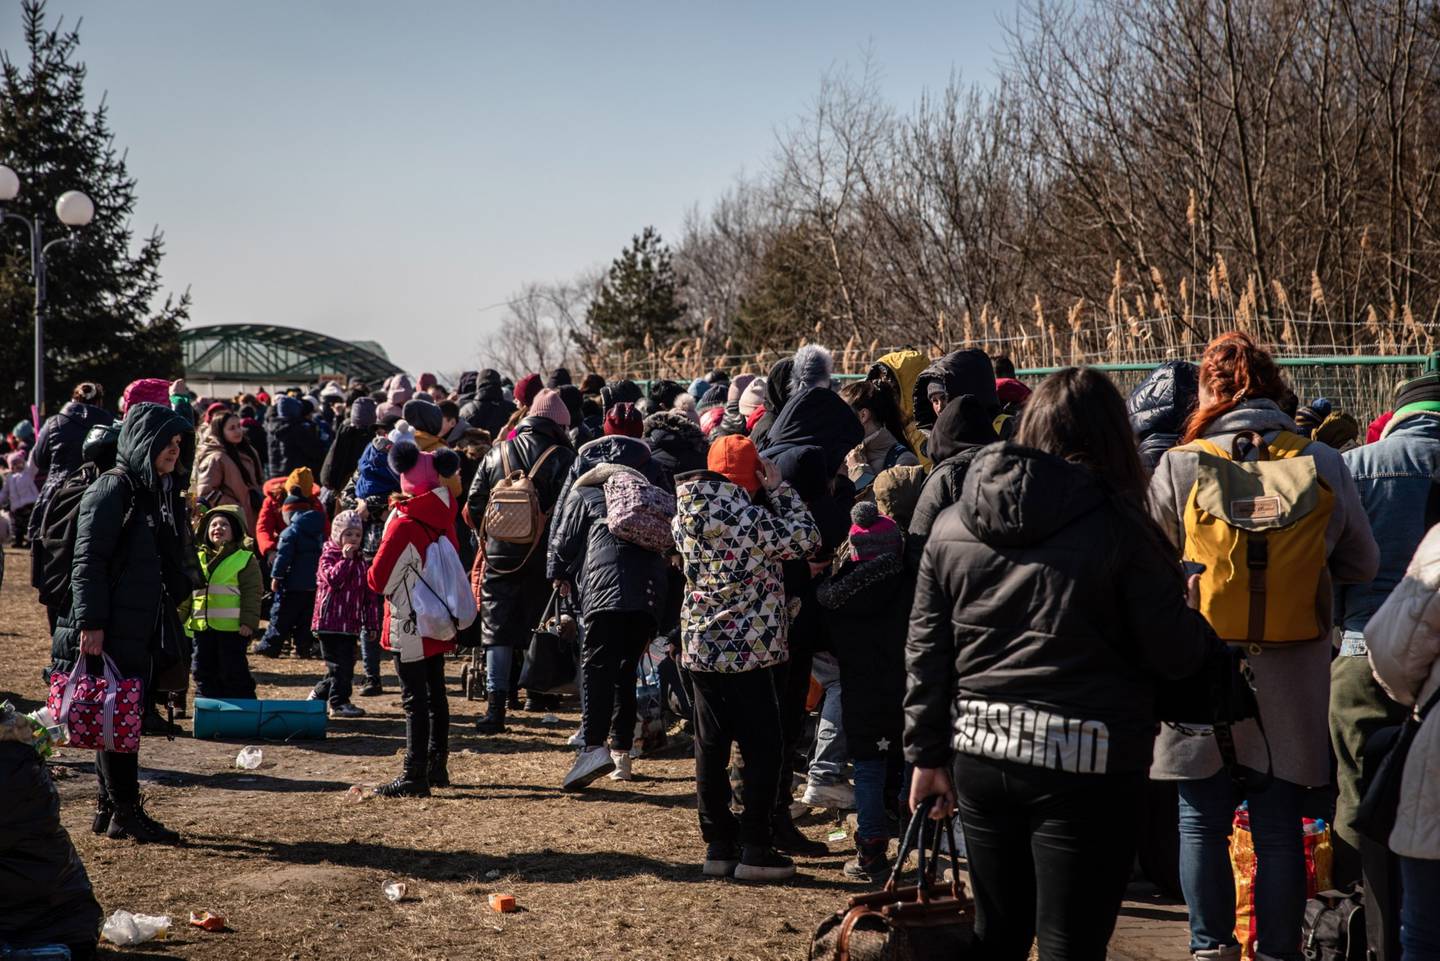 Ukrainian refugees queue to cross over into Poland via the Medyka border crossing in Shehyni, Ukraine, on Friday, March 18, 2022. The number of refugees reaching Poland from Ukraine now exceeds 2 million, mostly women with children, Polish border authorities said. Photographer: Angel Garcia/Bloombergdfd